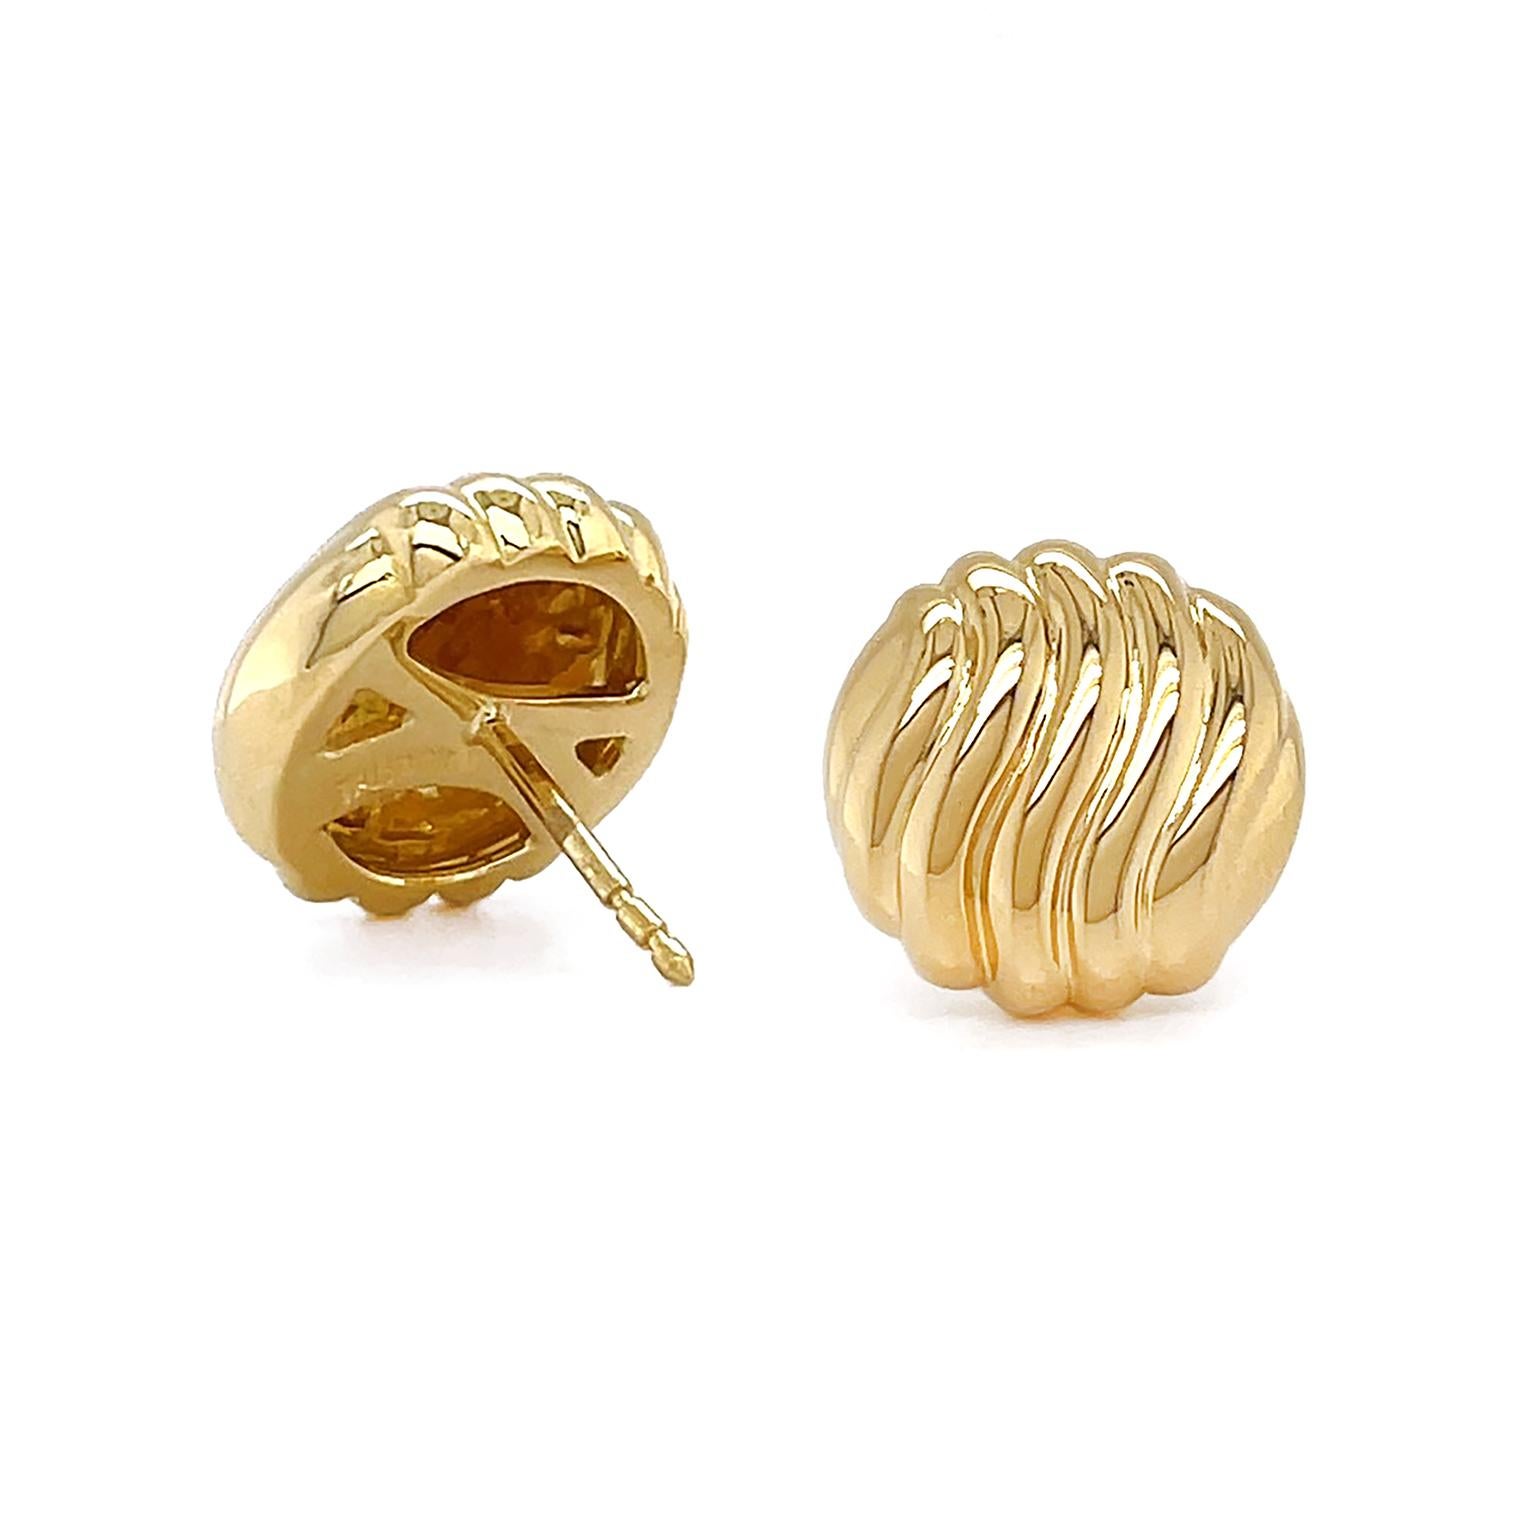 Timeless monochromatic gold earrings are given a glamorous update. A round 18k yellow gold base features rows of raised lines that curve in soft waves. The waves are polished and reflect the light and shadows that are cast on them. Clip-backs secure